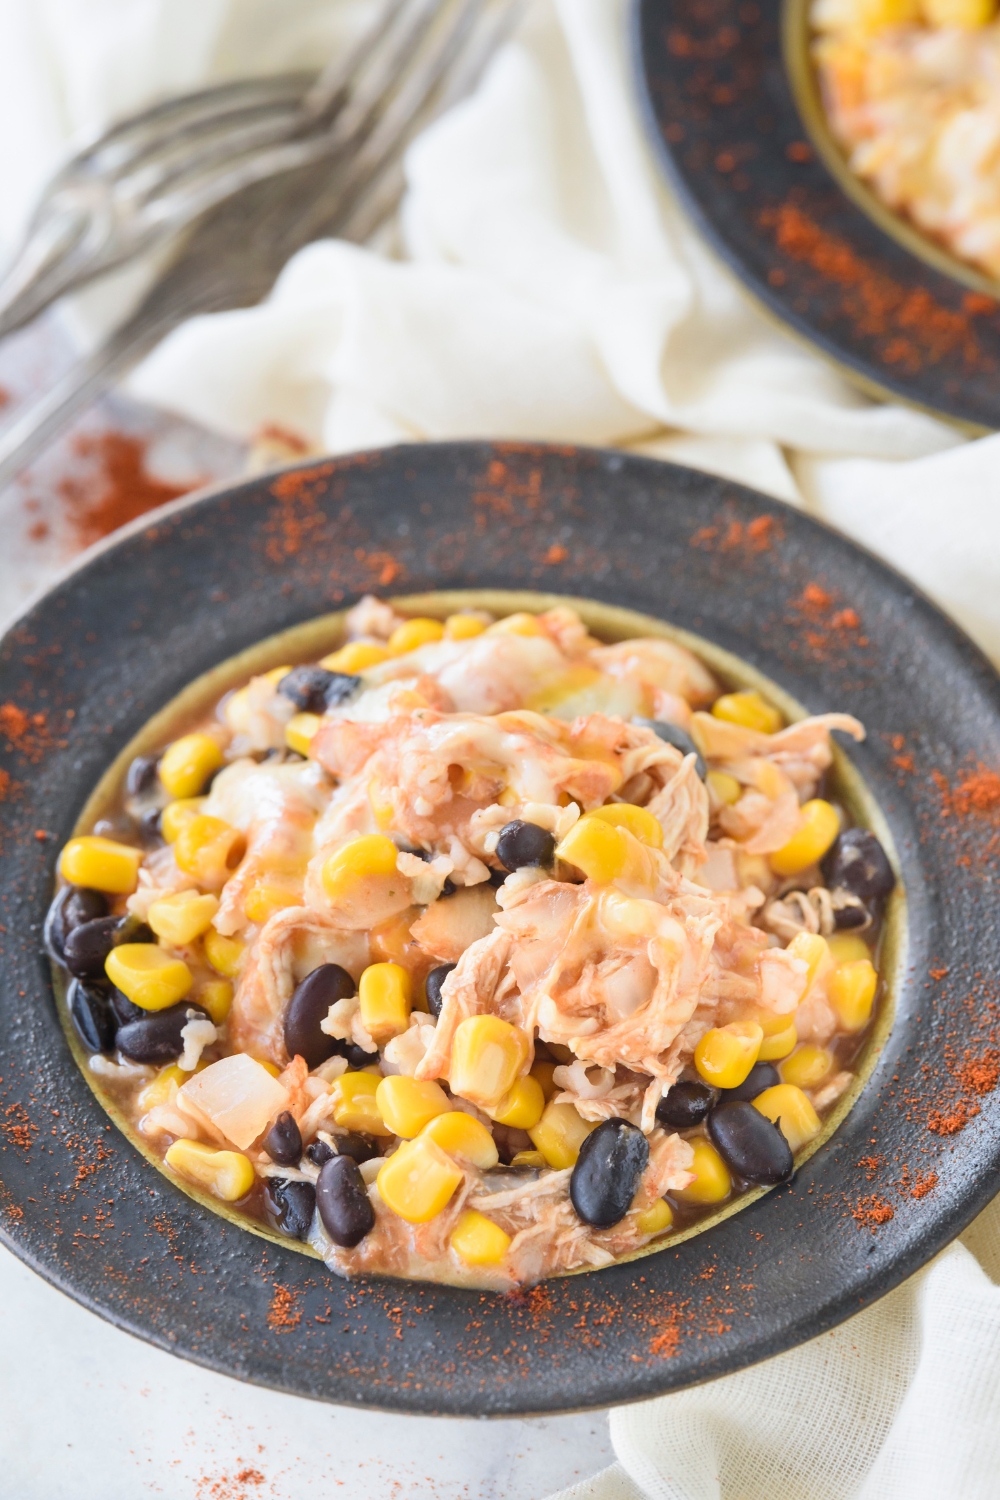 A bowl filled with shredded and seasoned chicken, corn, and black beans.